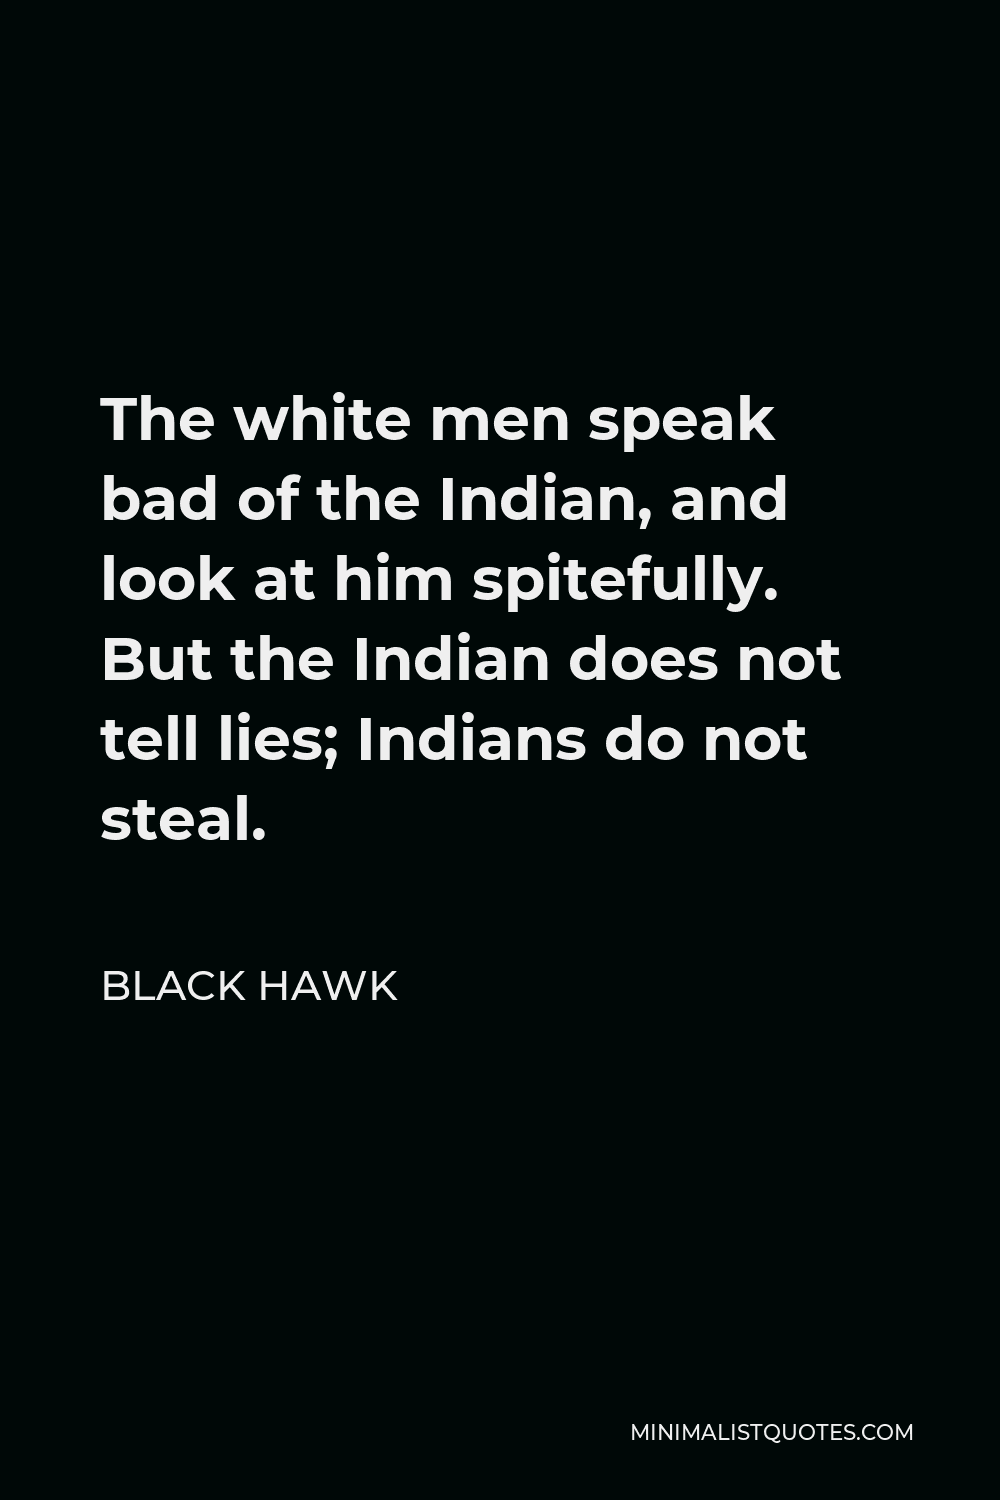 Black Hawk Quote - The white men speak bad of the Indian, and look at him spitefully. But the Indian does not tell lies; Indians do not steal.